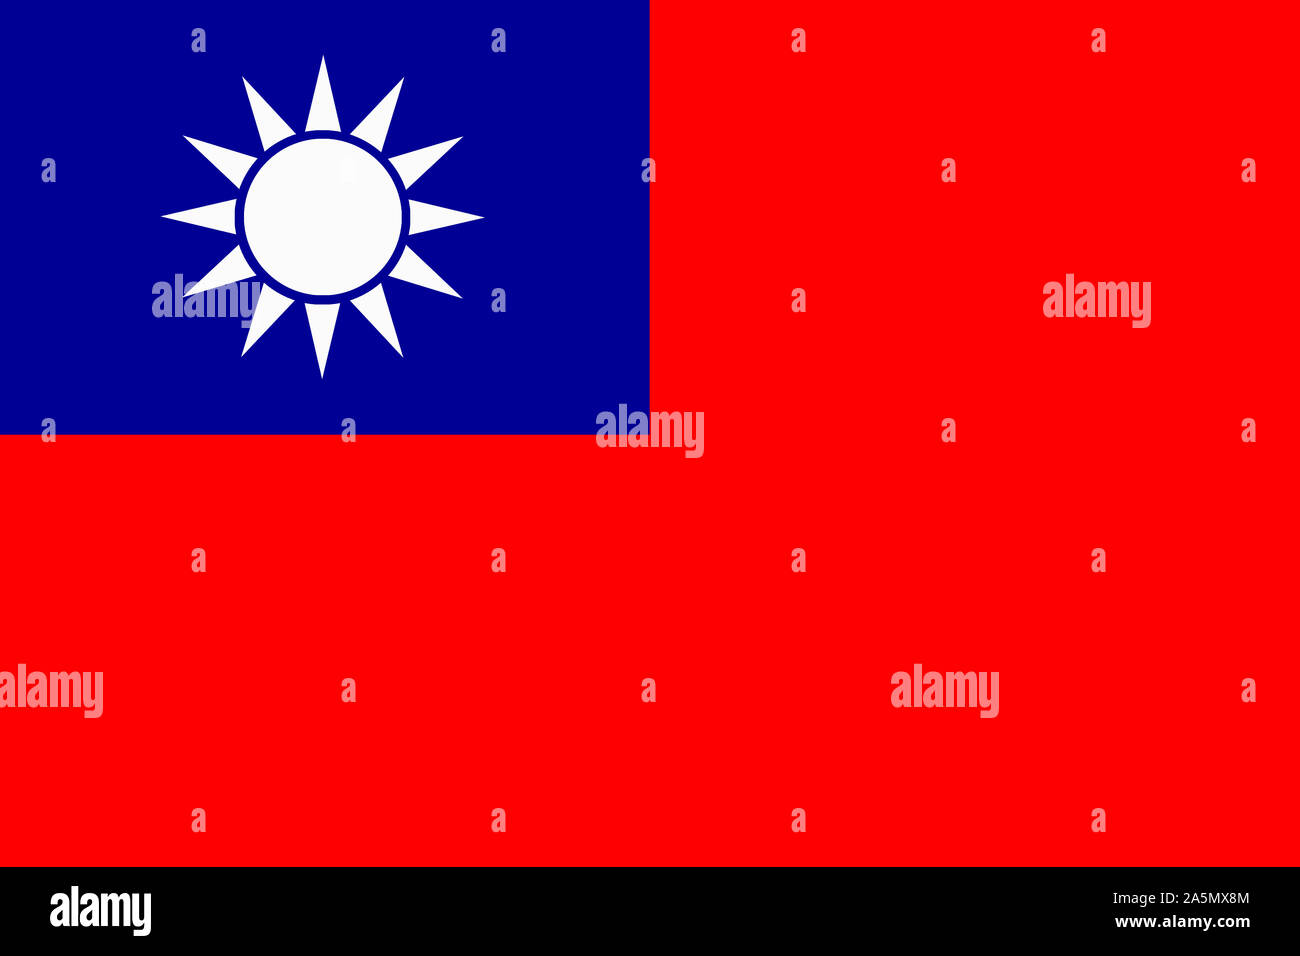 A Taiwan flag background illustration Blue Sky White Sun Wholly Red Earth Stock Photo